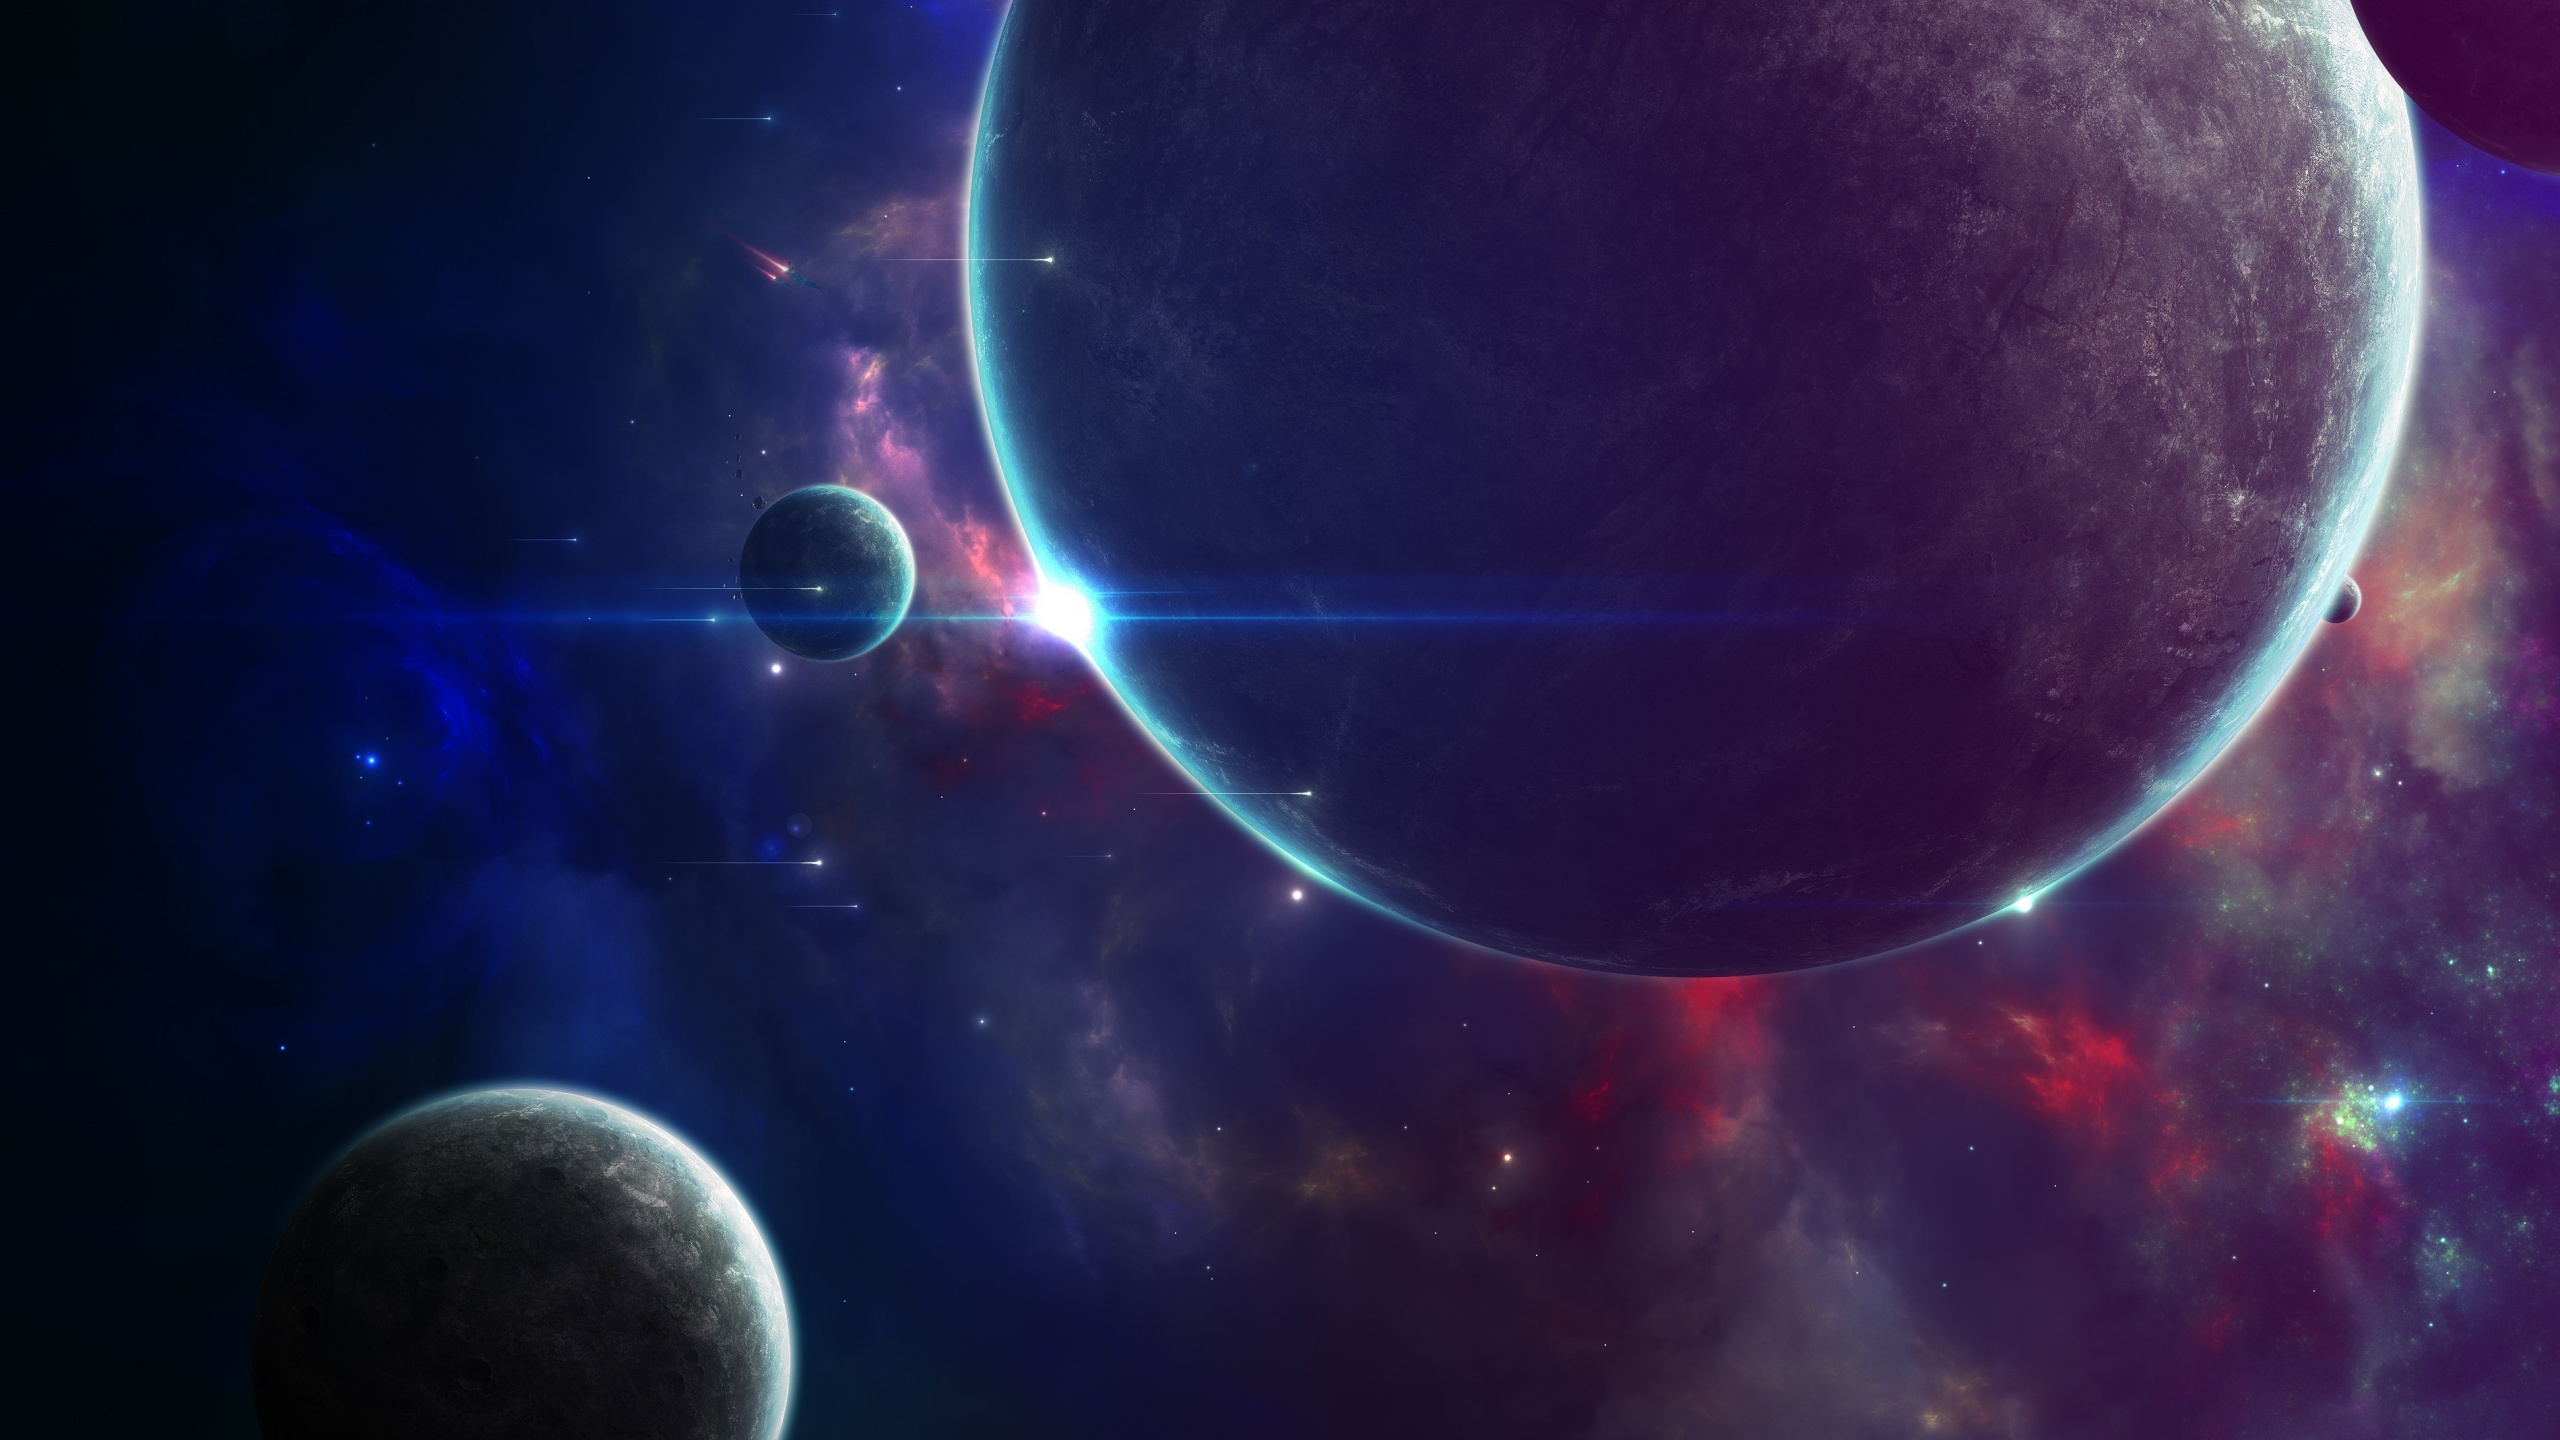 Moon and Stars in The Sky. Wallpaper in 2560x1440 Resolution